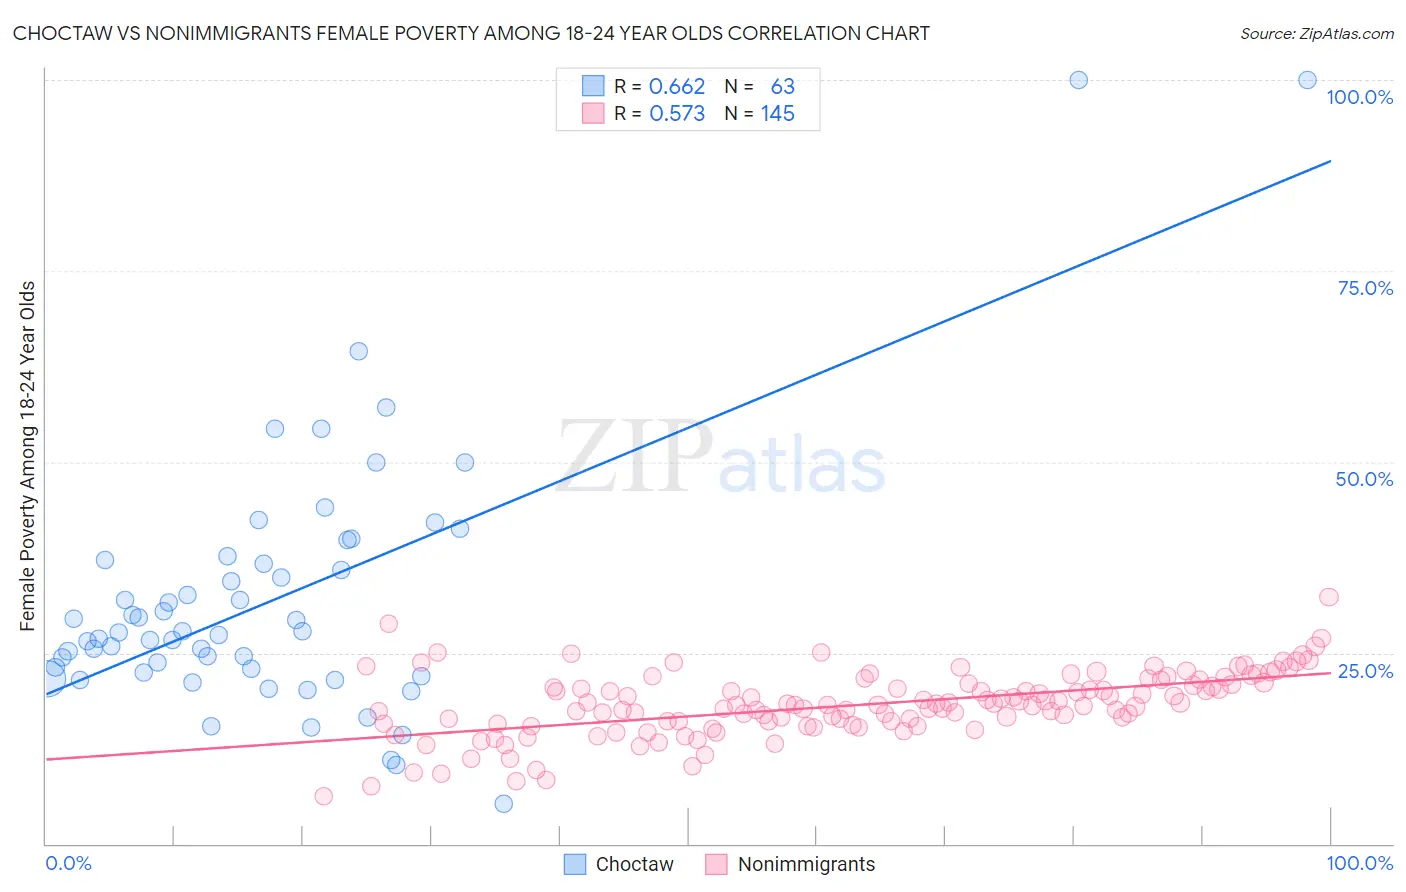 Choctaw vs Nonimmigrants Female Poverty Among 18-24 Year Olds